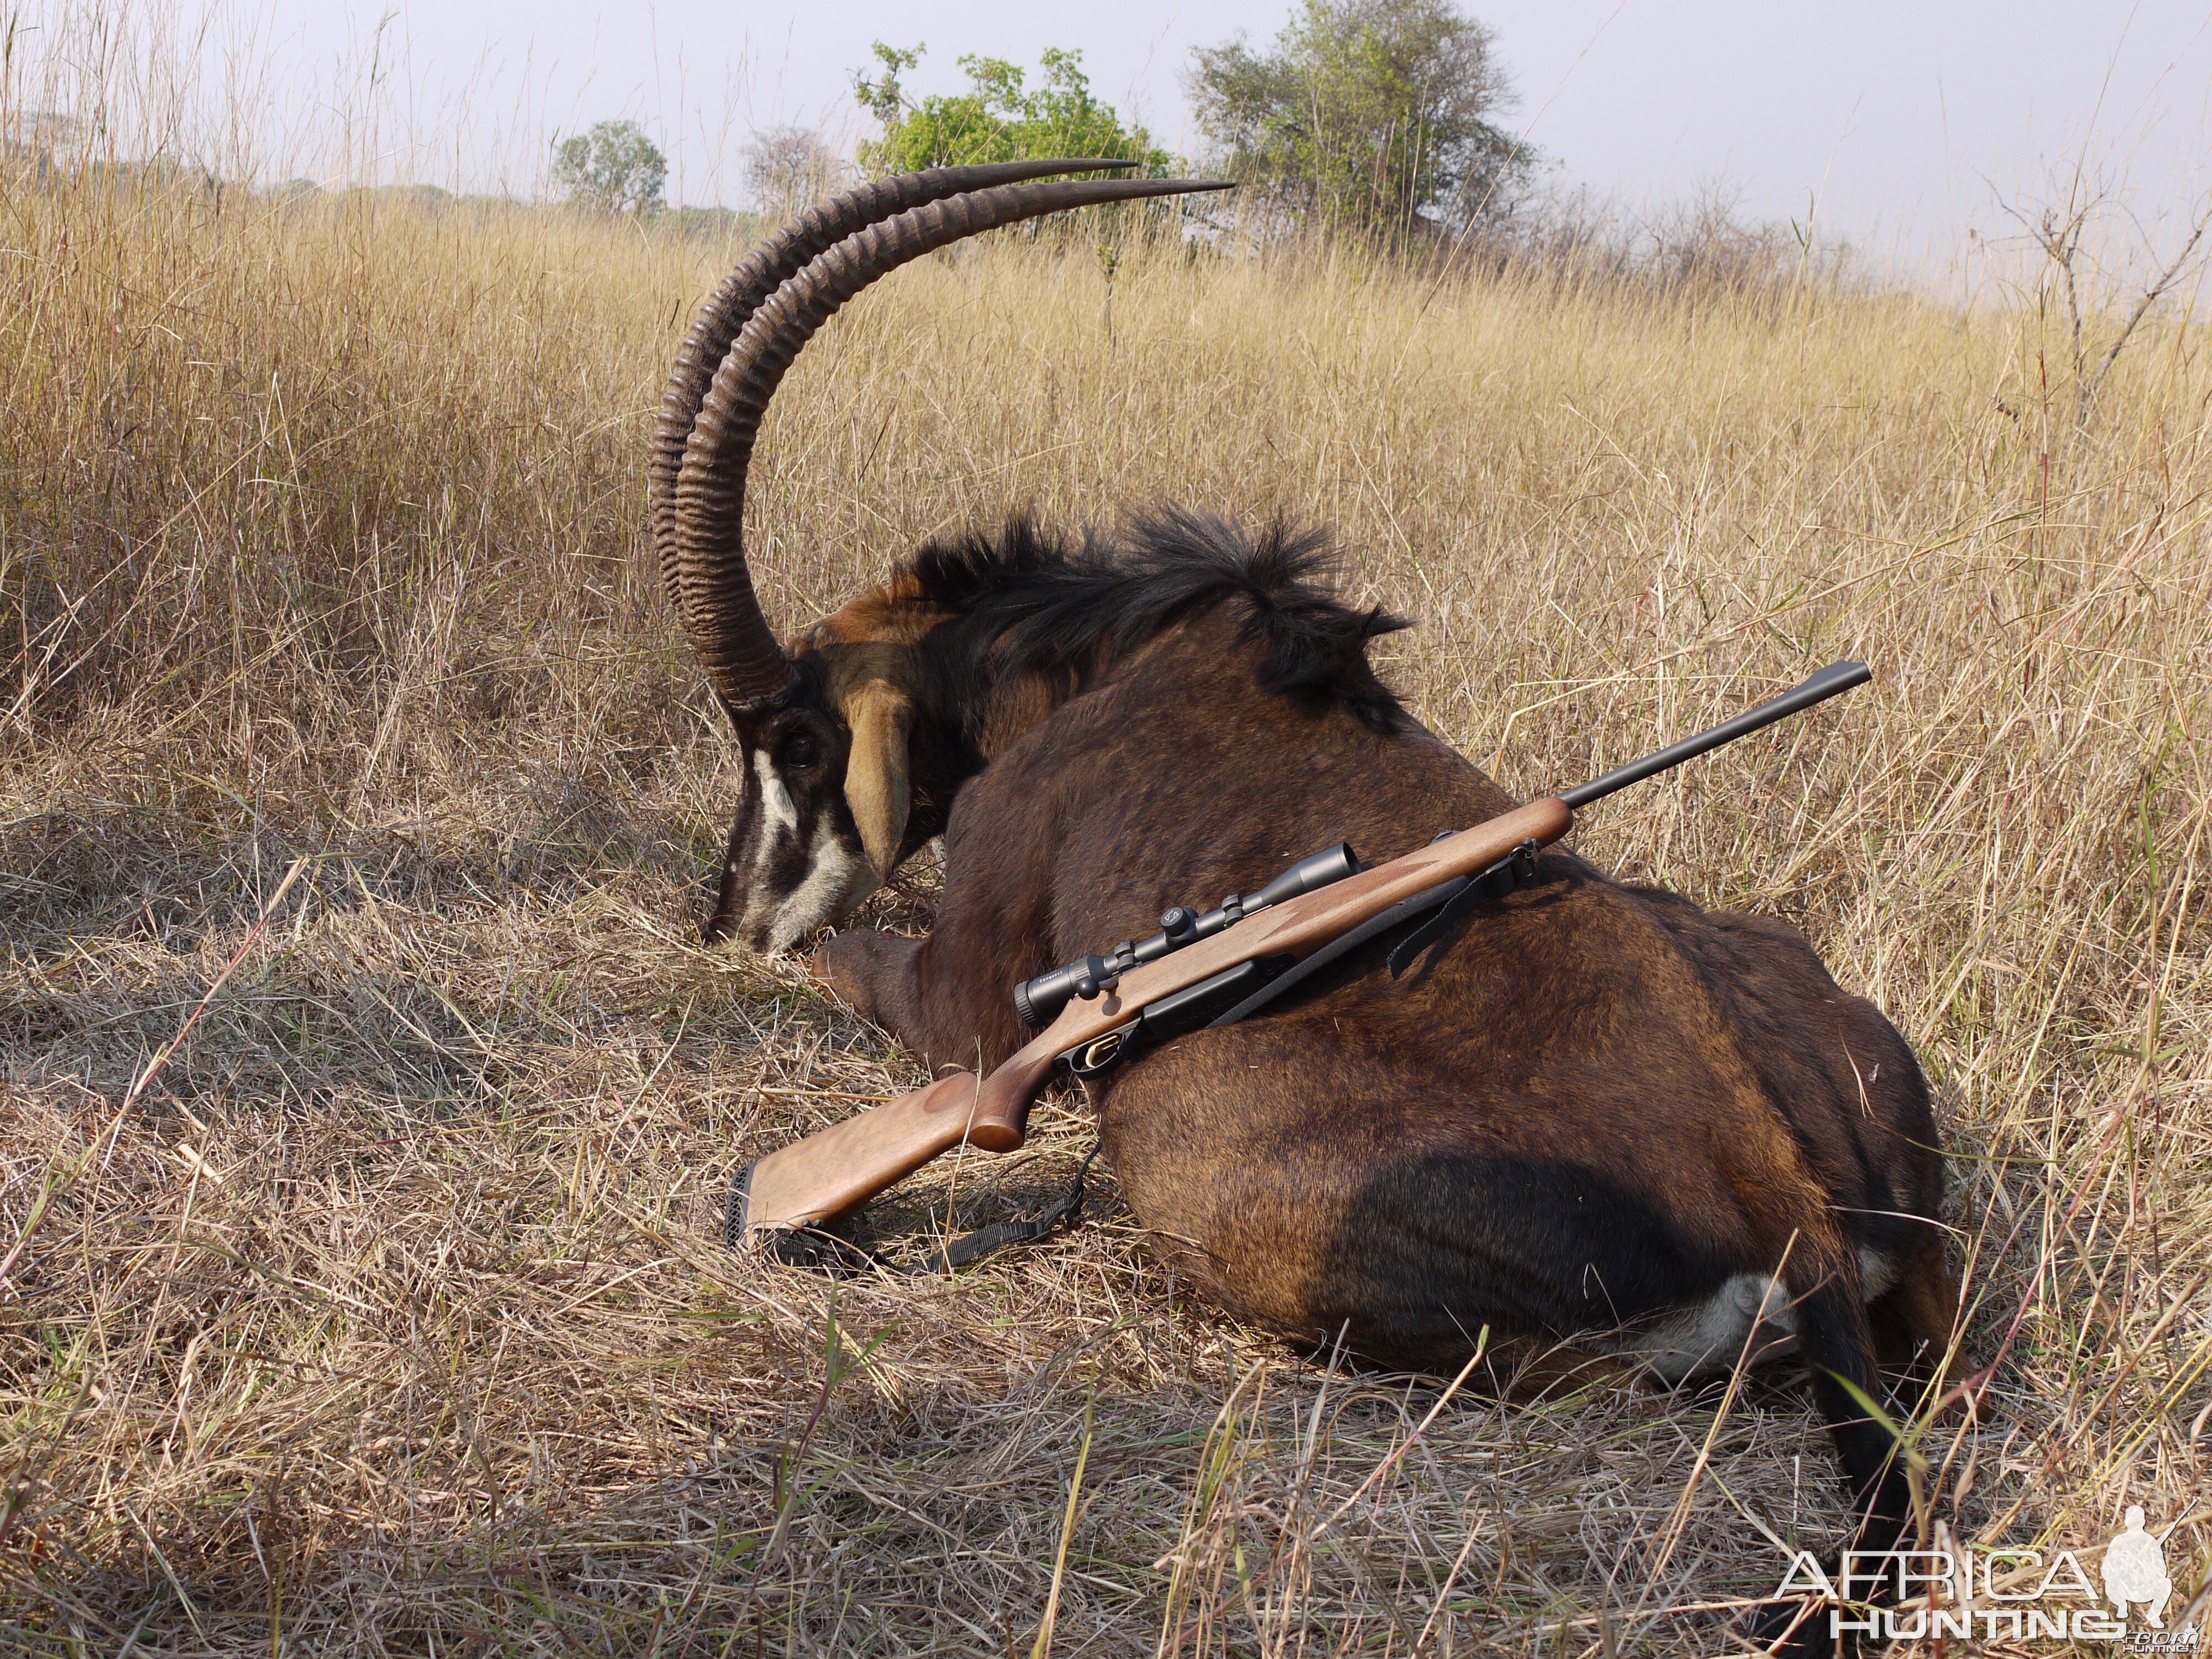 same client who took the eland took this nice sable as well in sept 2013 at